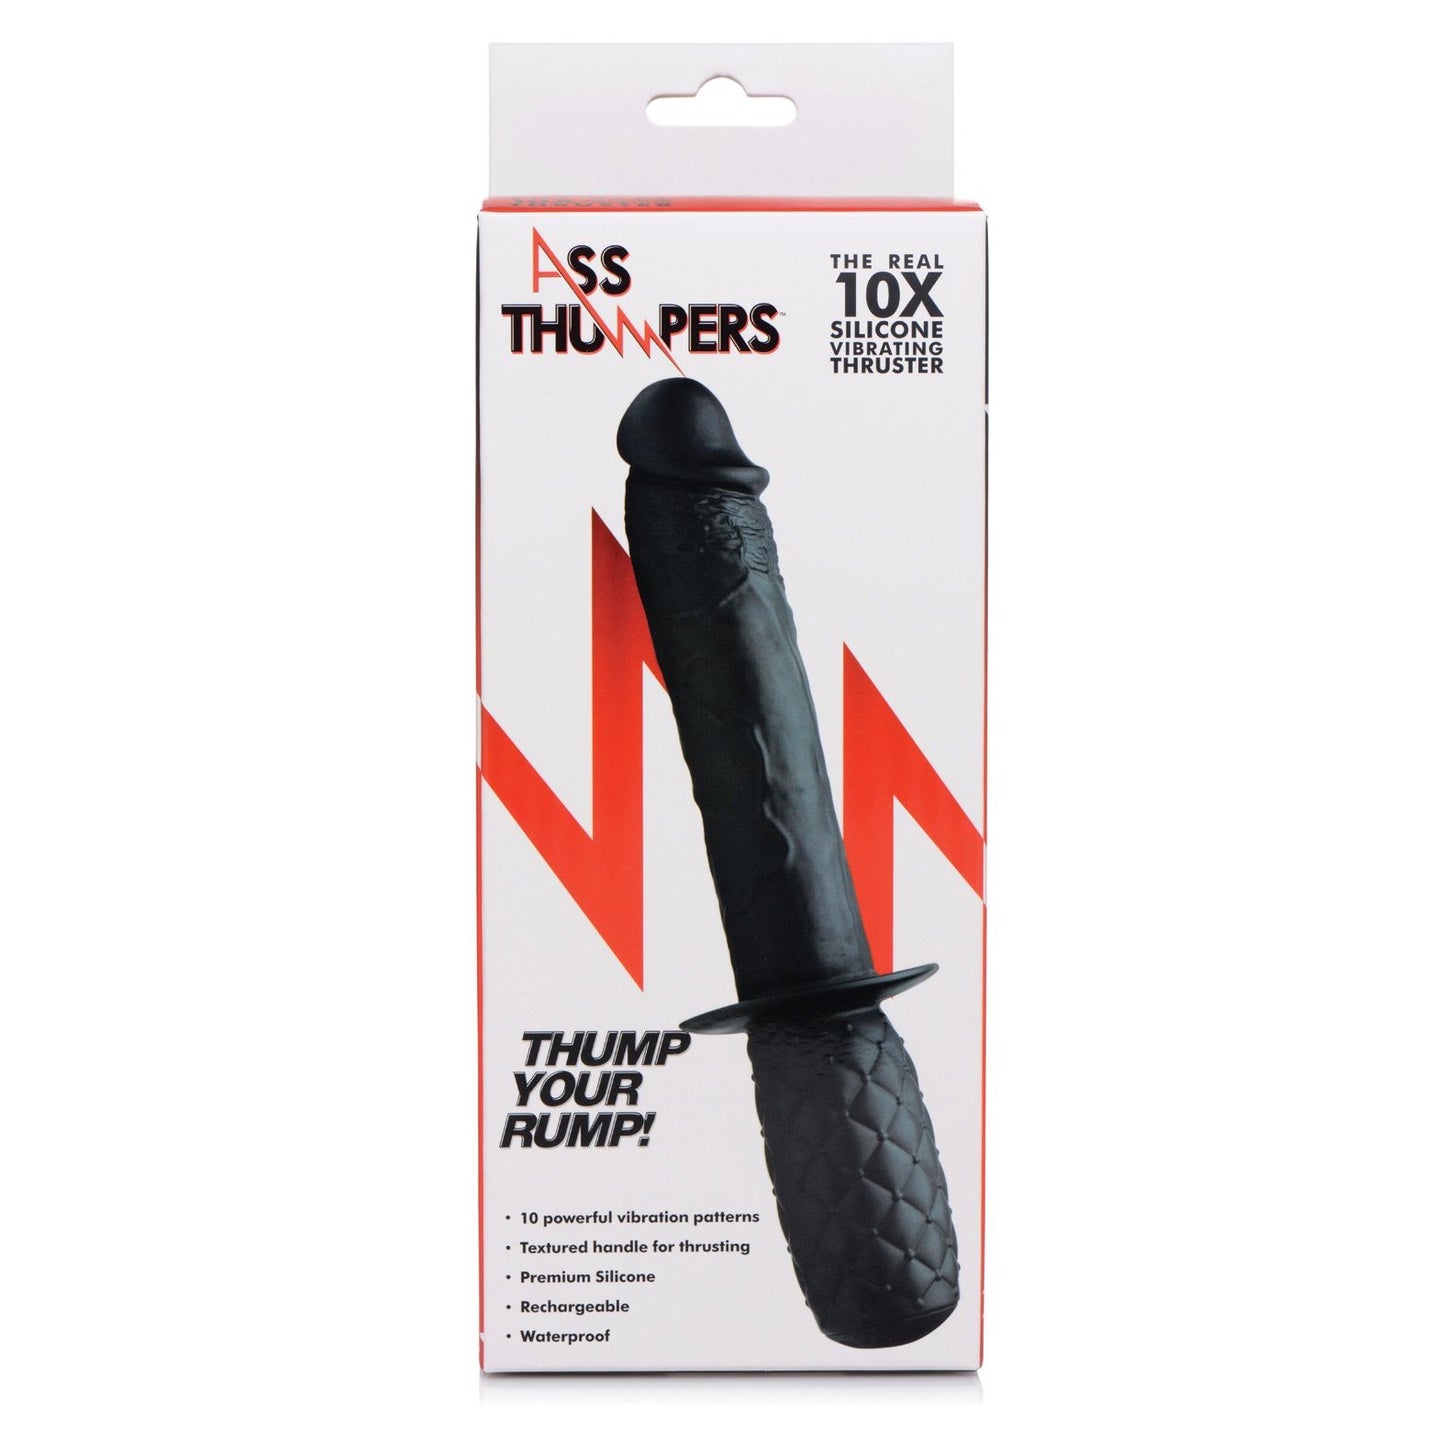 Ass Thumpers Real 10x Silicone Vibrating Thruster